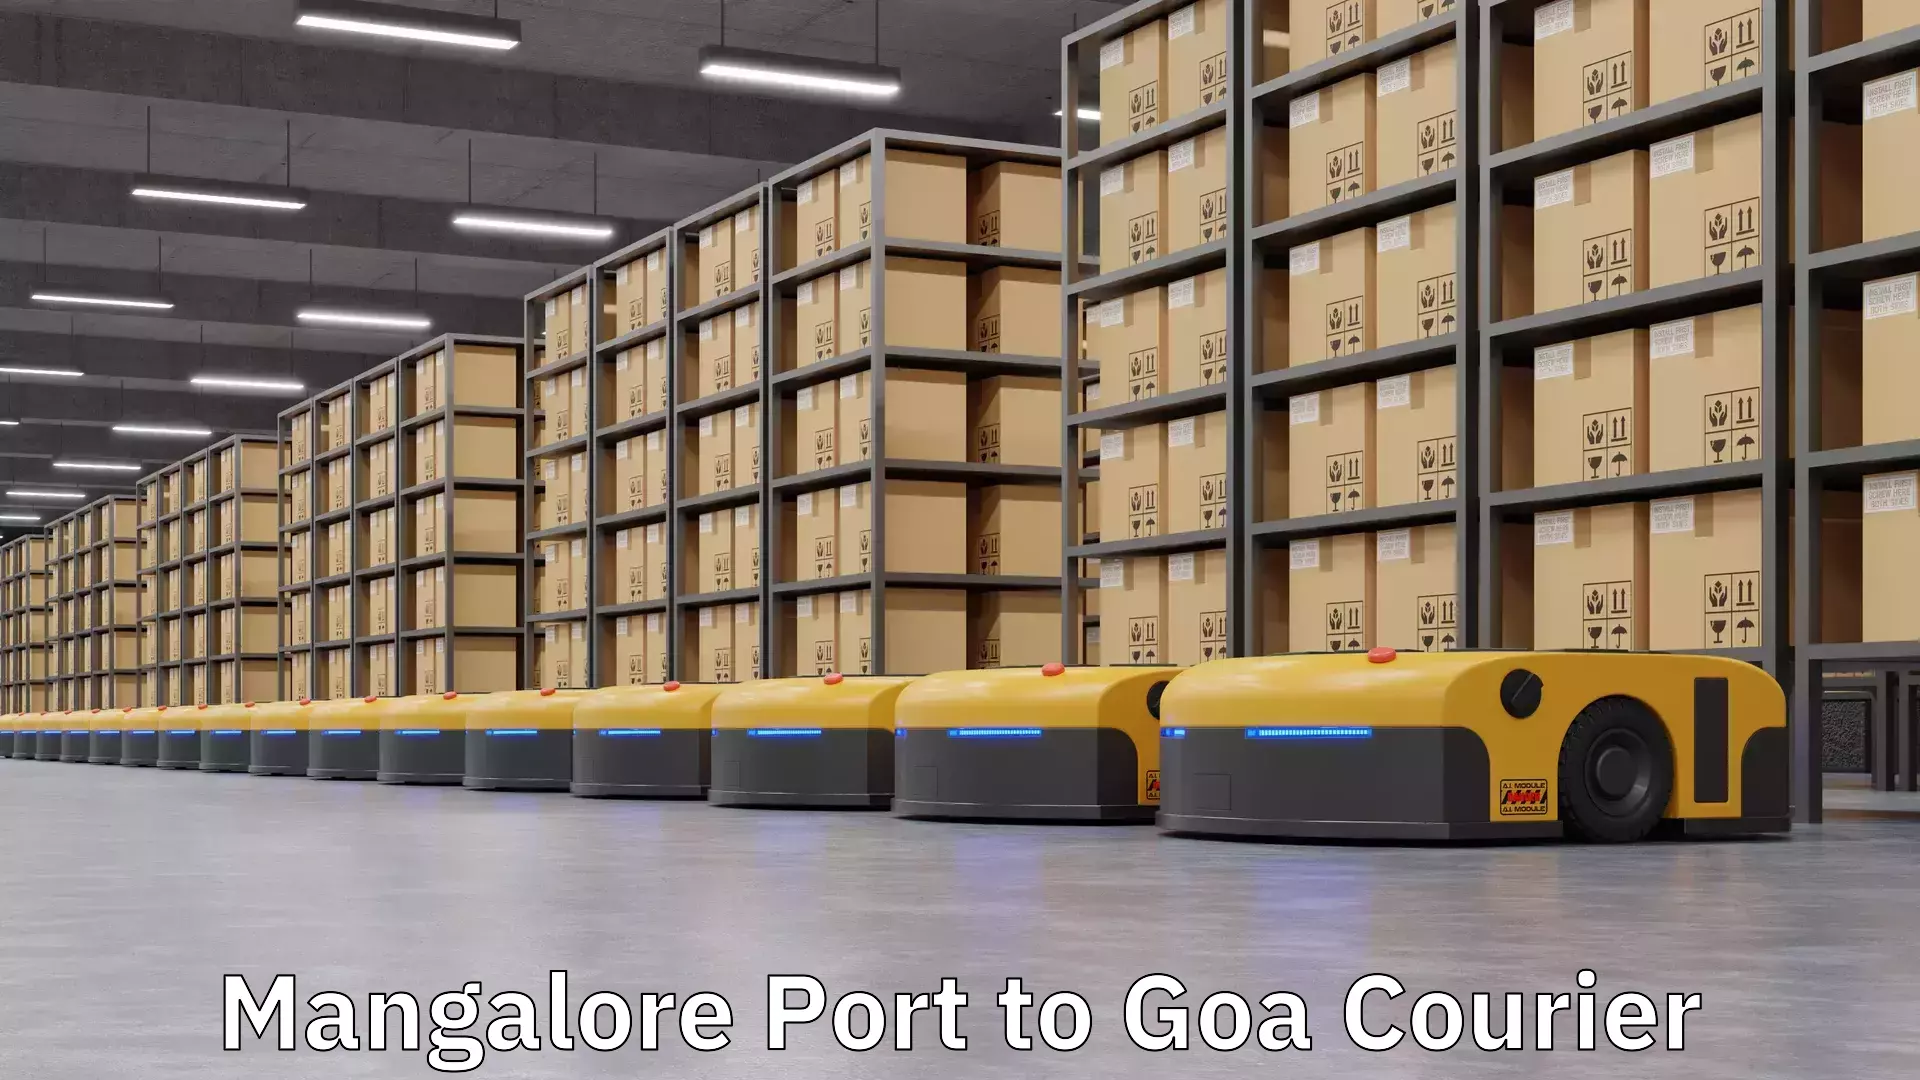 International courier networks Mangalore Port to Goa